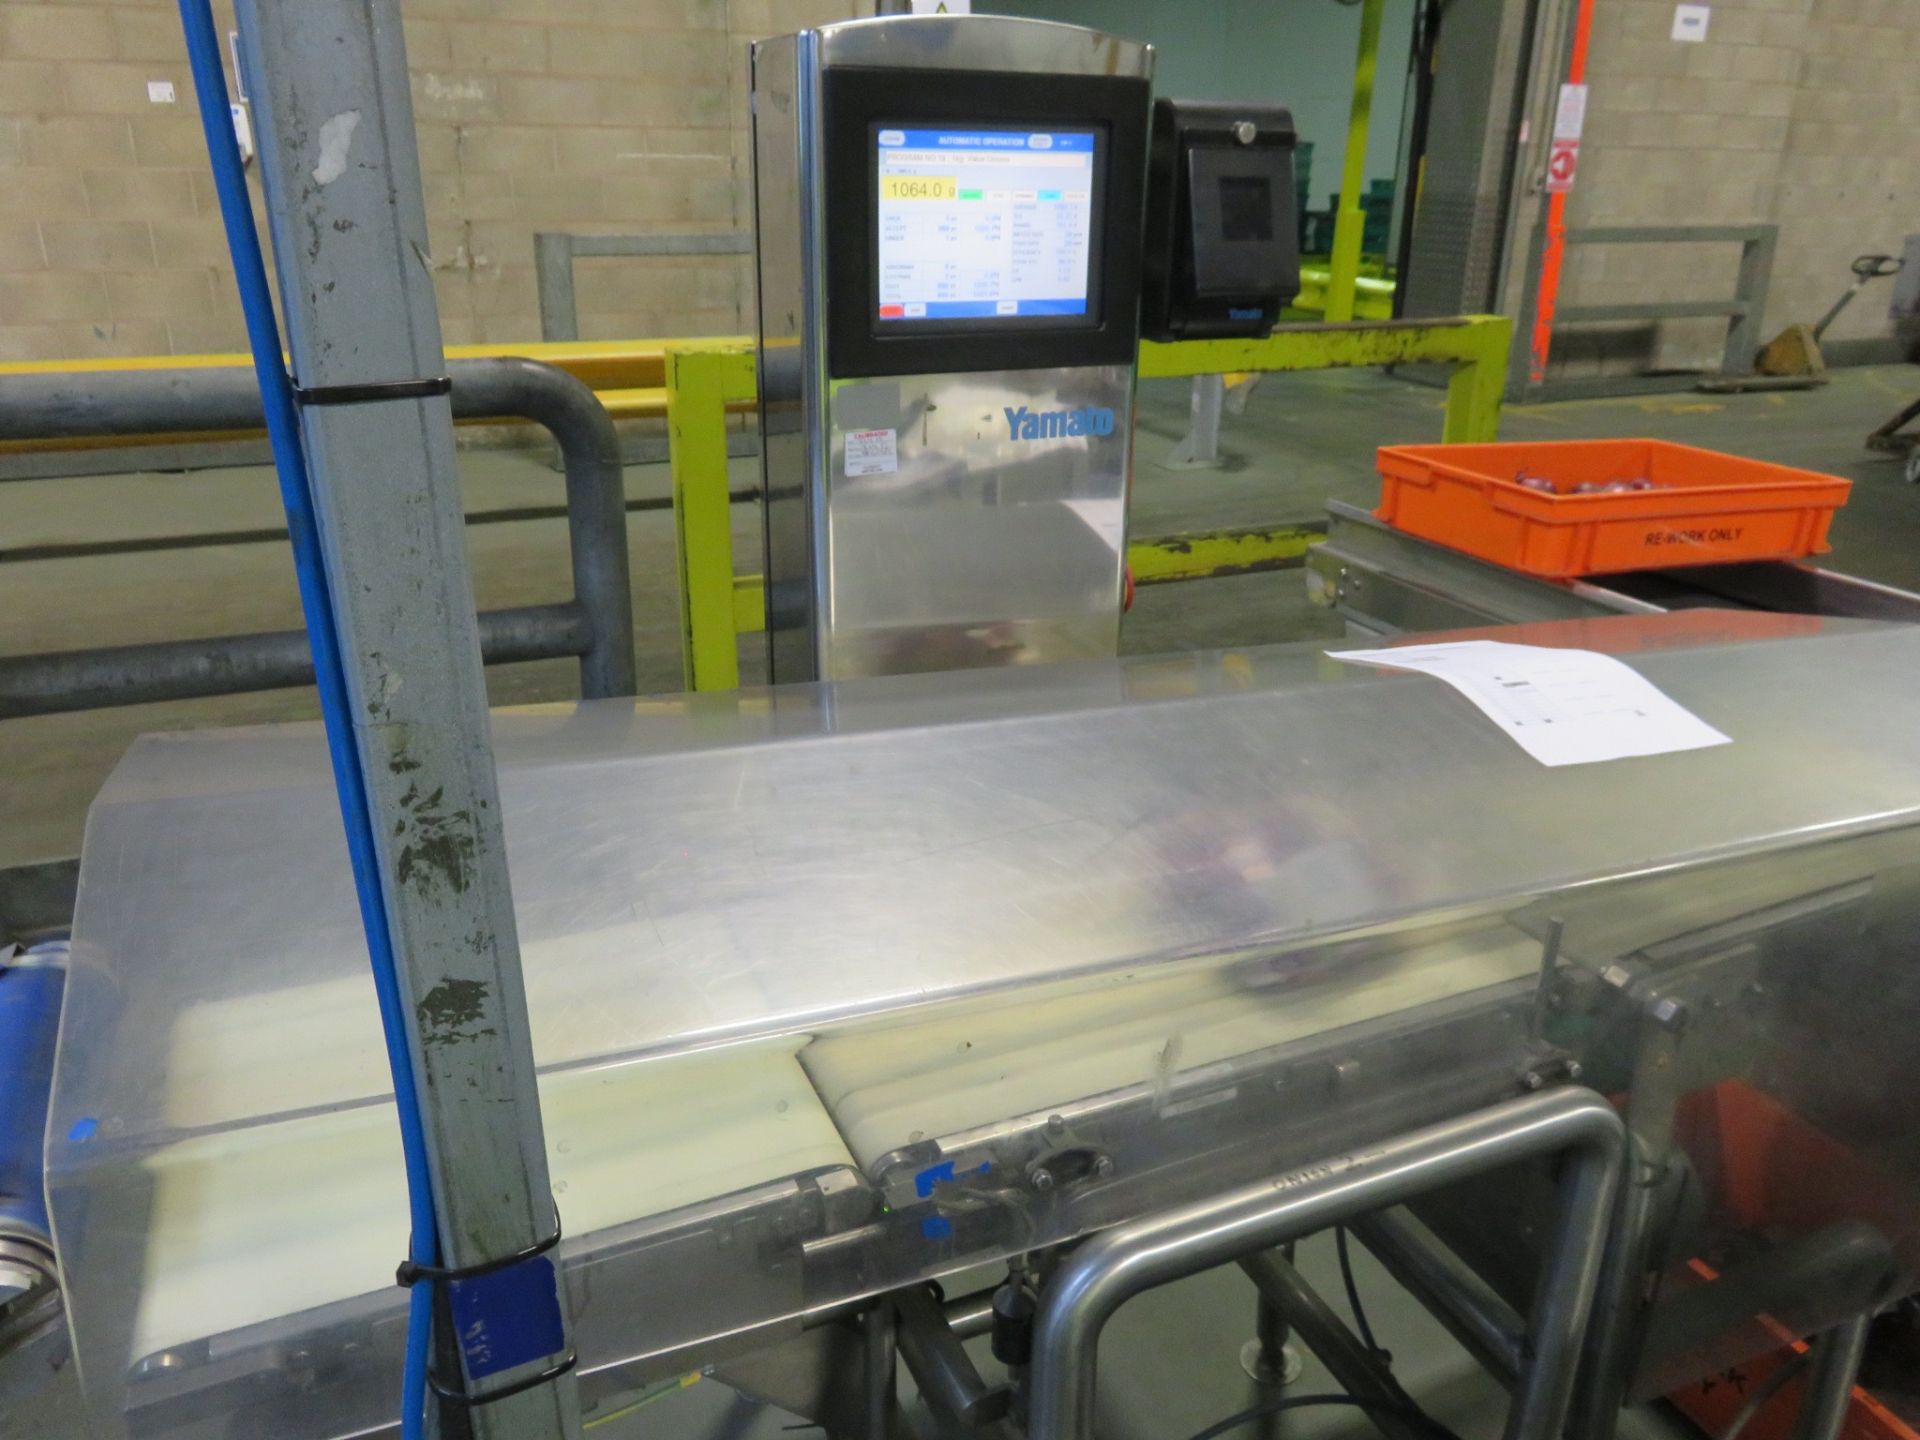 Yomato 6kg checkweigher with belt stop reject. Touch screen control. 600mm long weigh platform